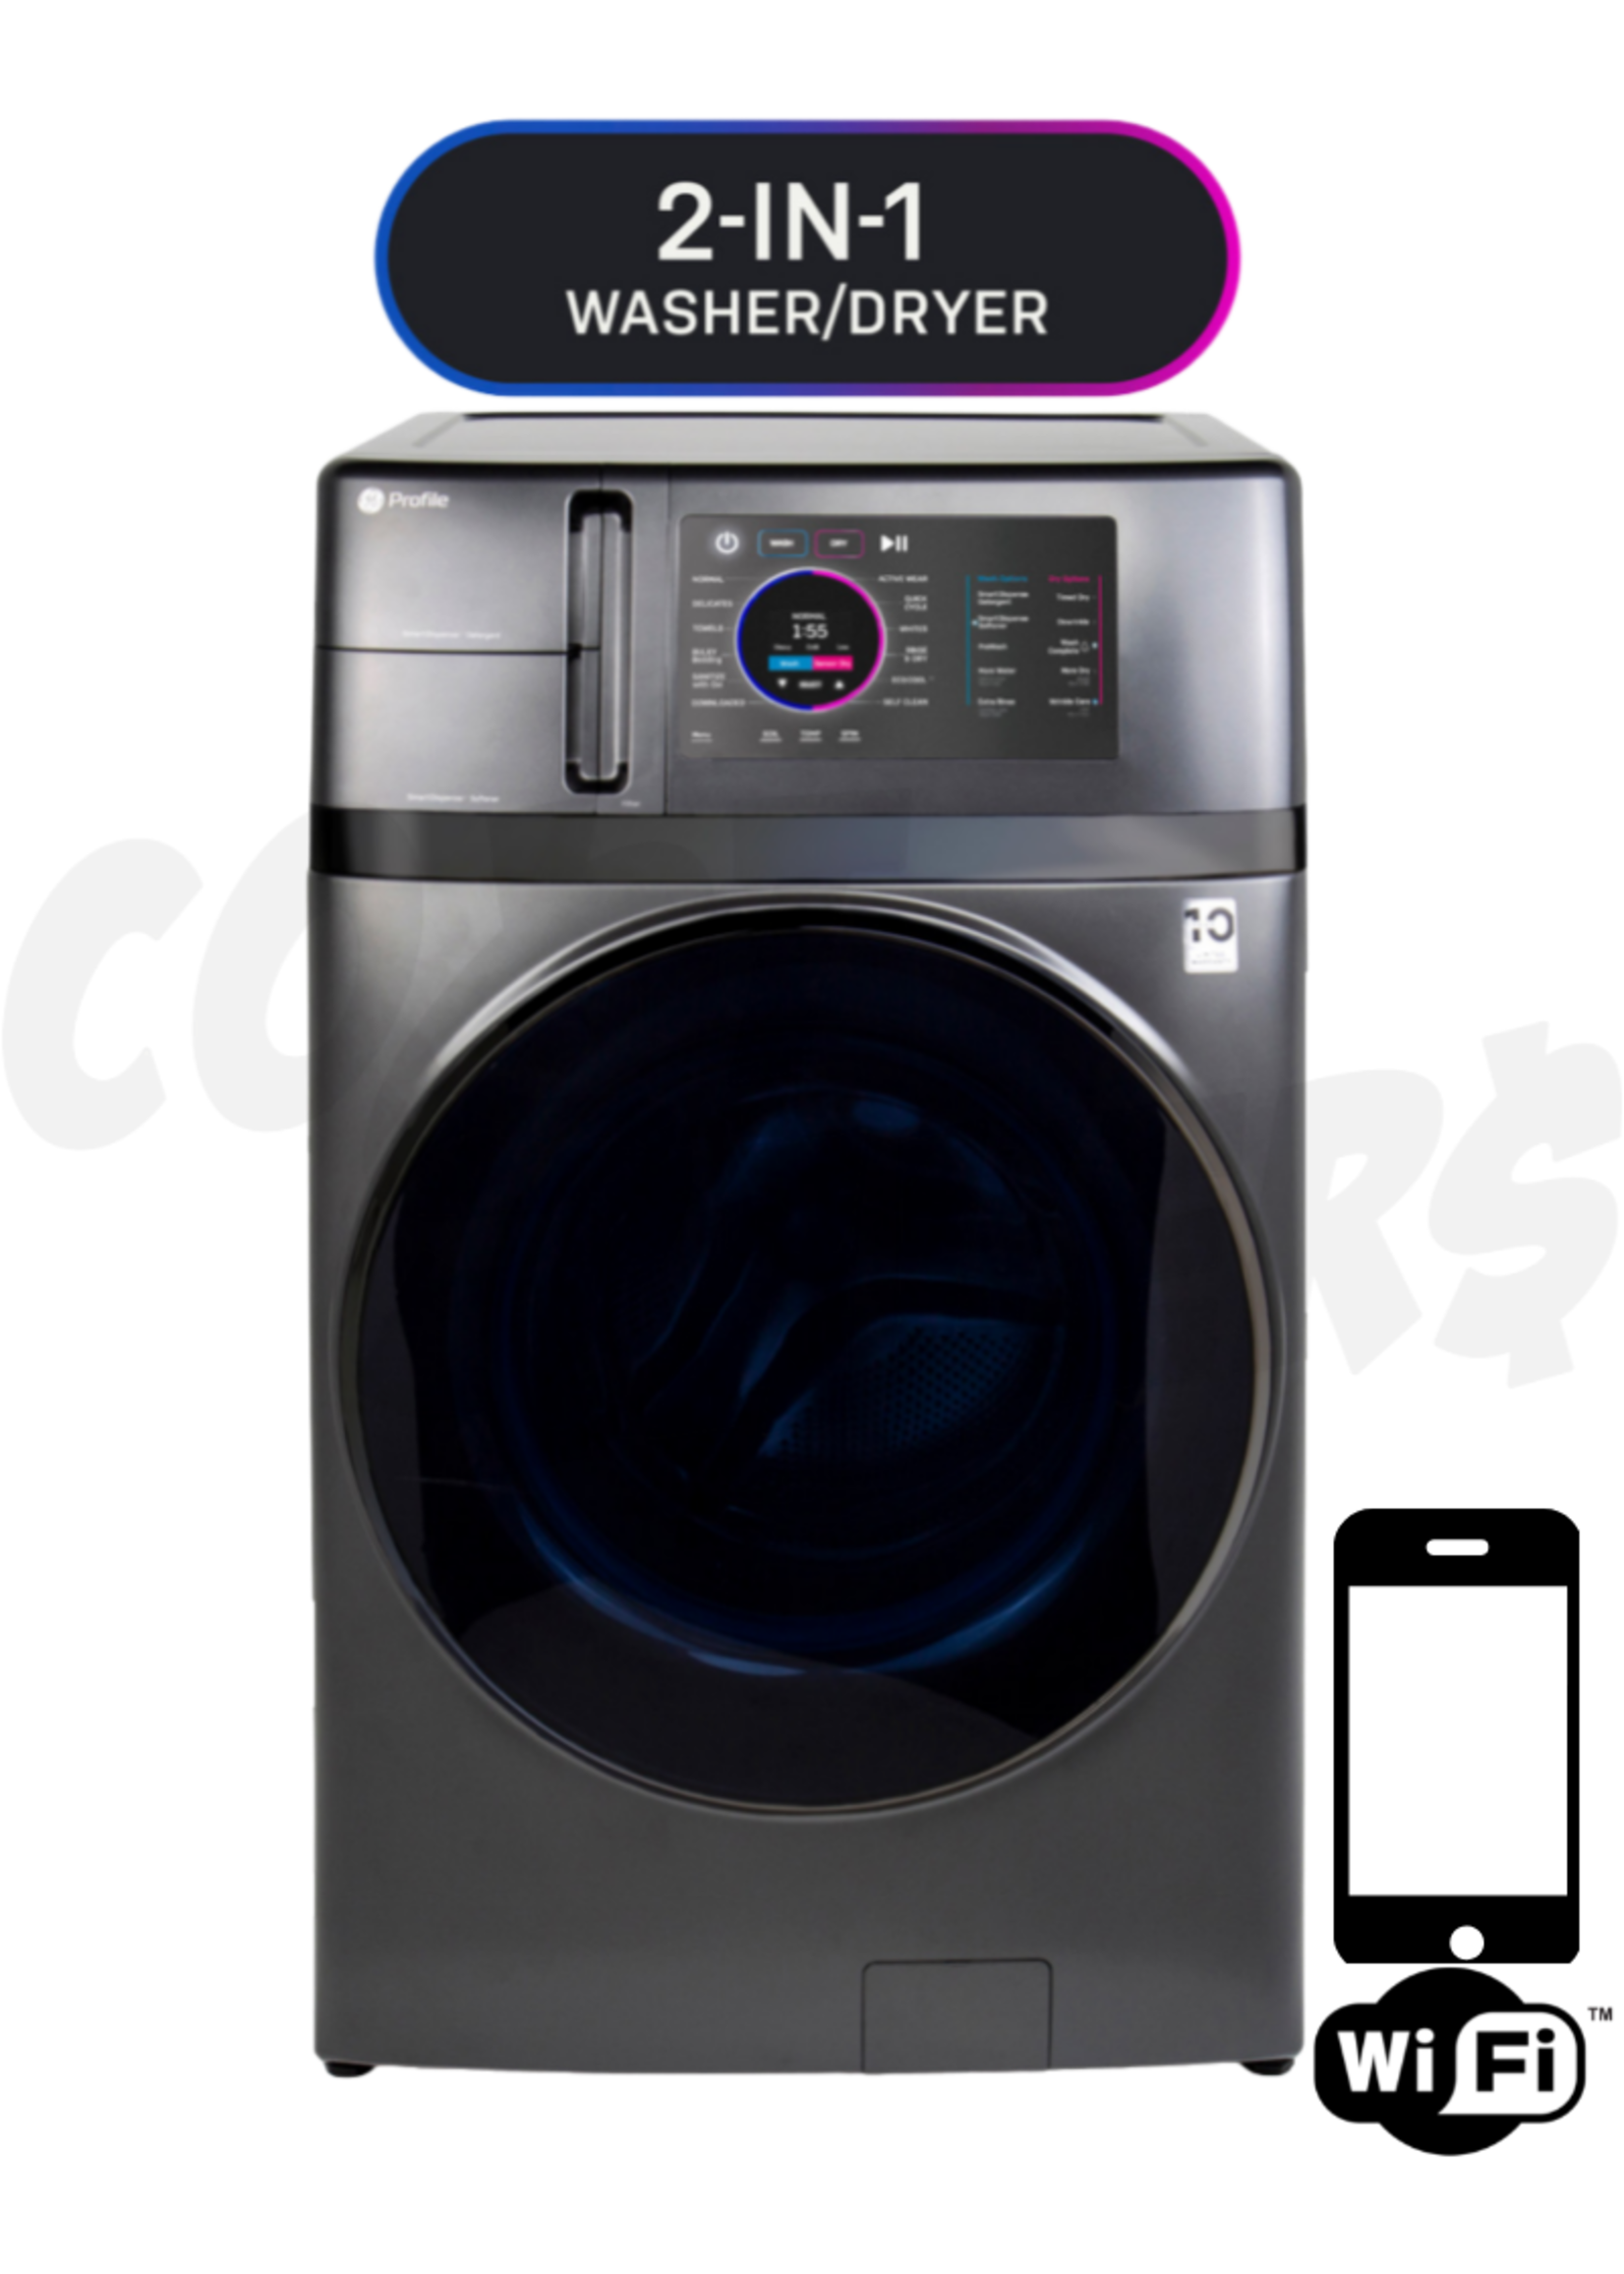 G.E G.E. Profile 4.8 cu. ft. Capacity Washer & Electric Dryer in 1